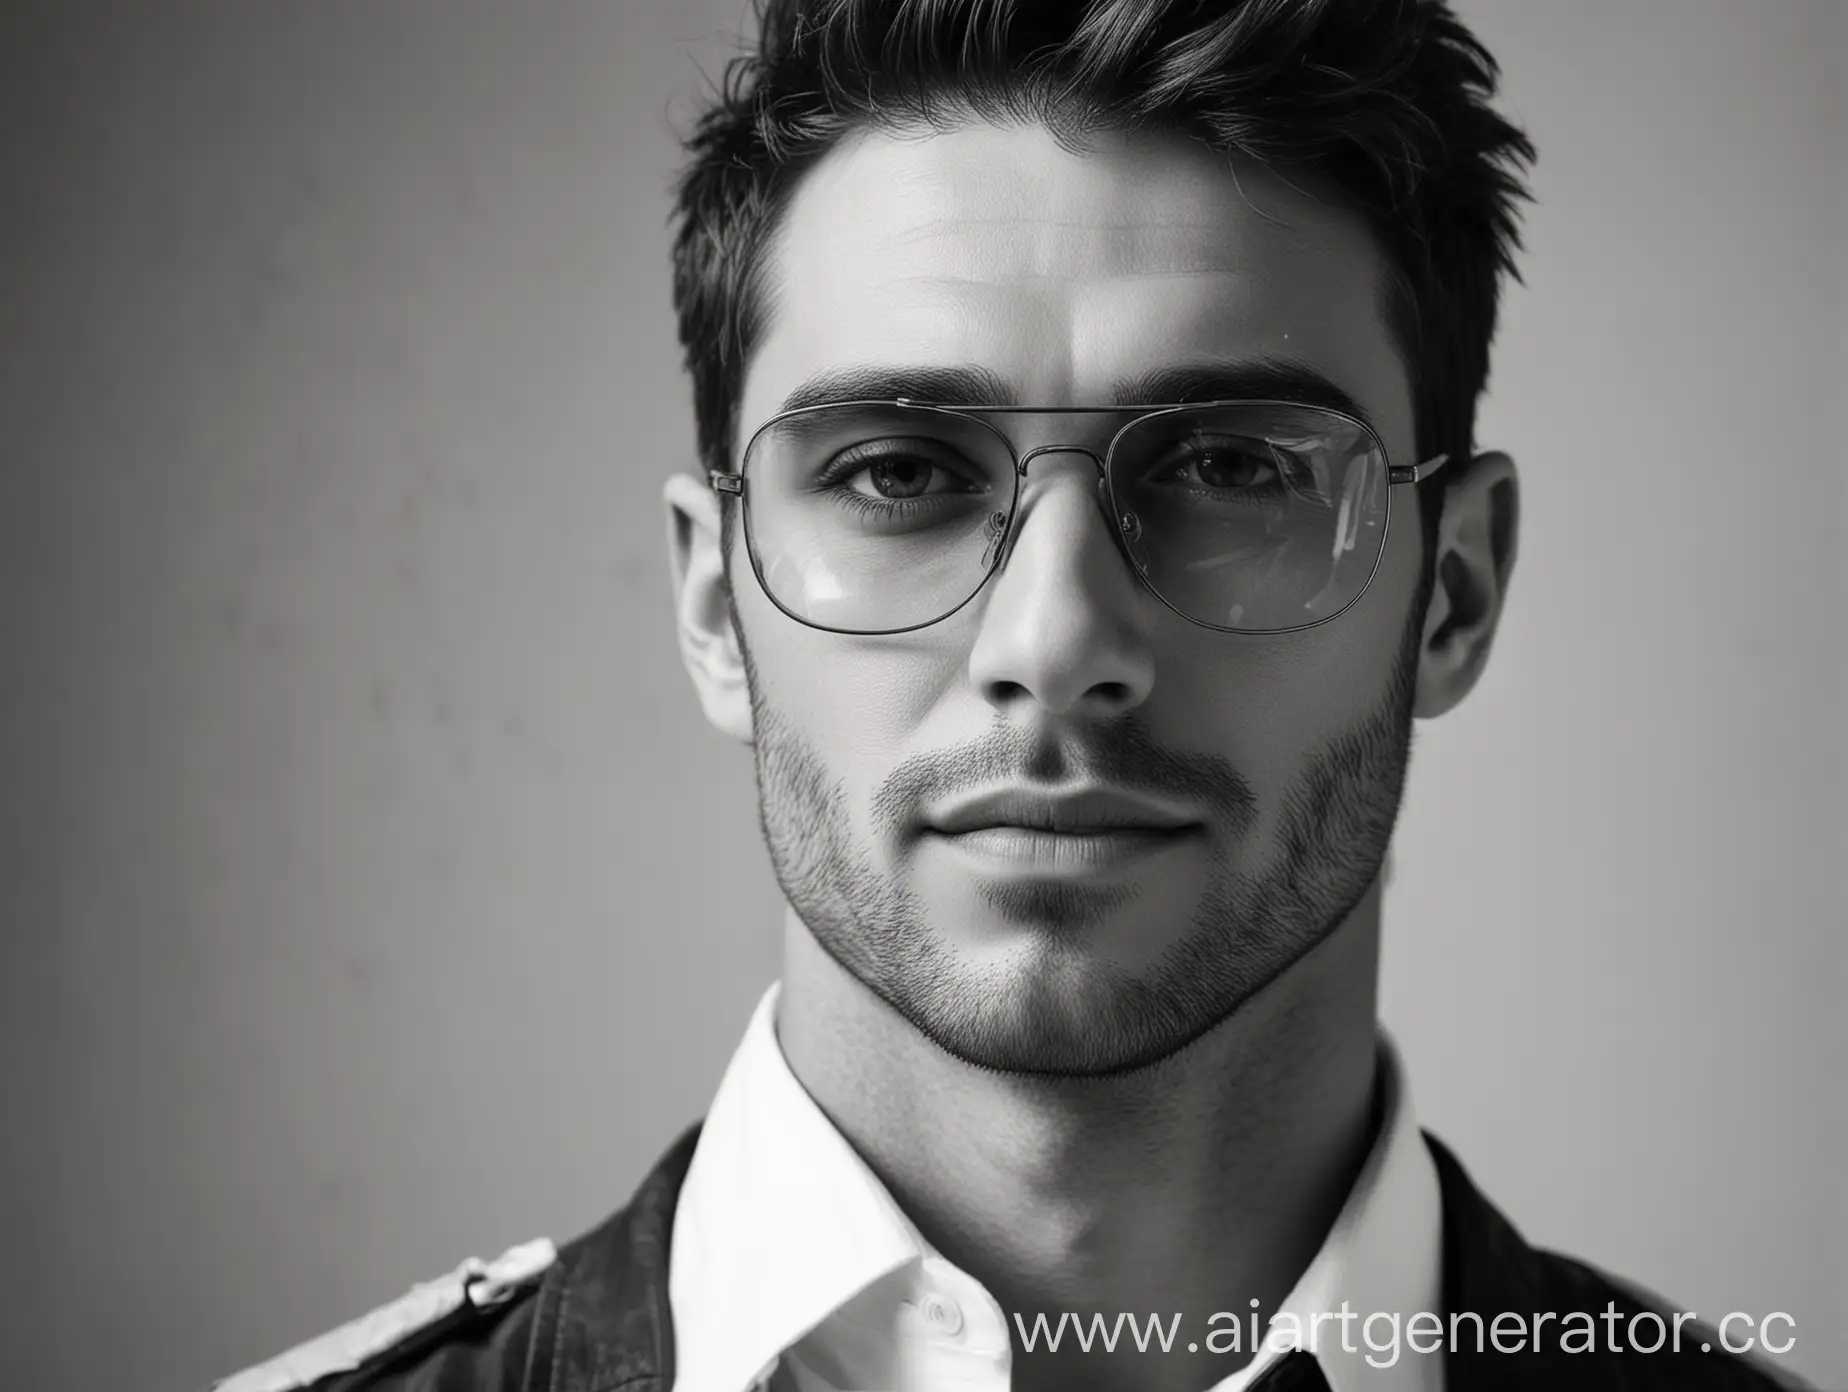 CloseUp-Portrait-of-a-Stylish-Man-with-Aviator-Glasses-in-Black-and-White